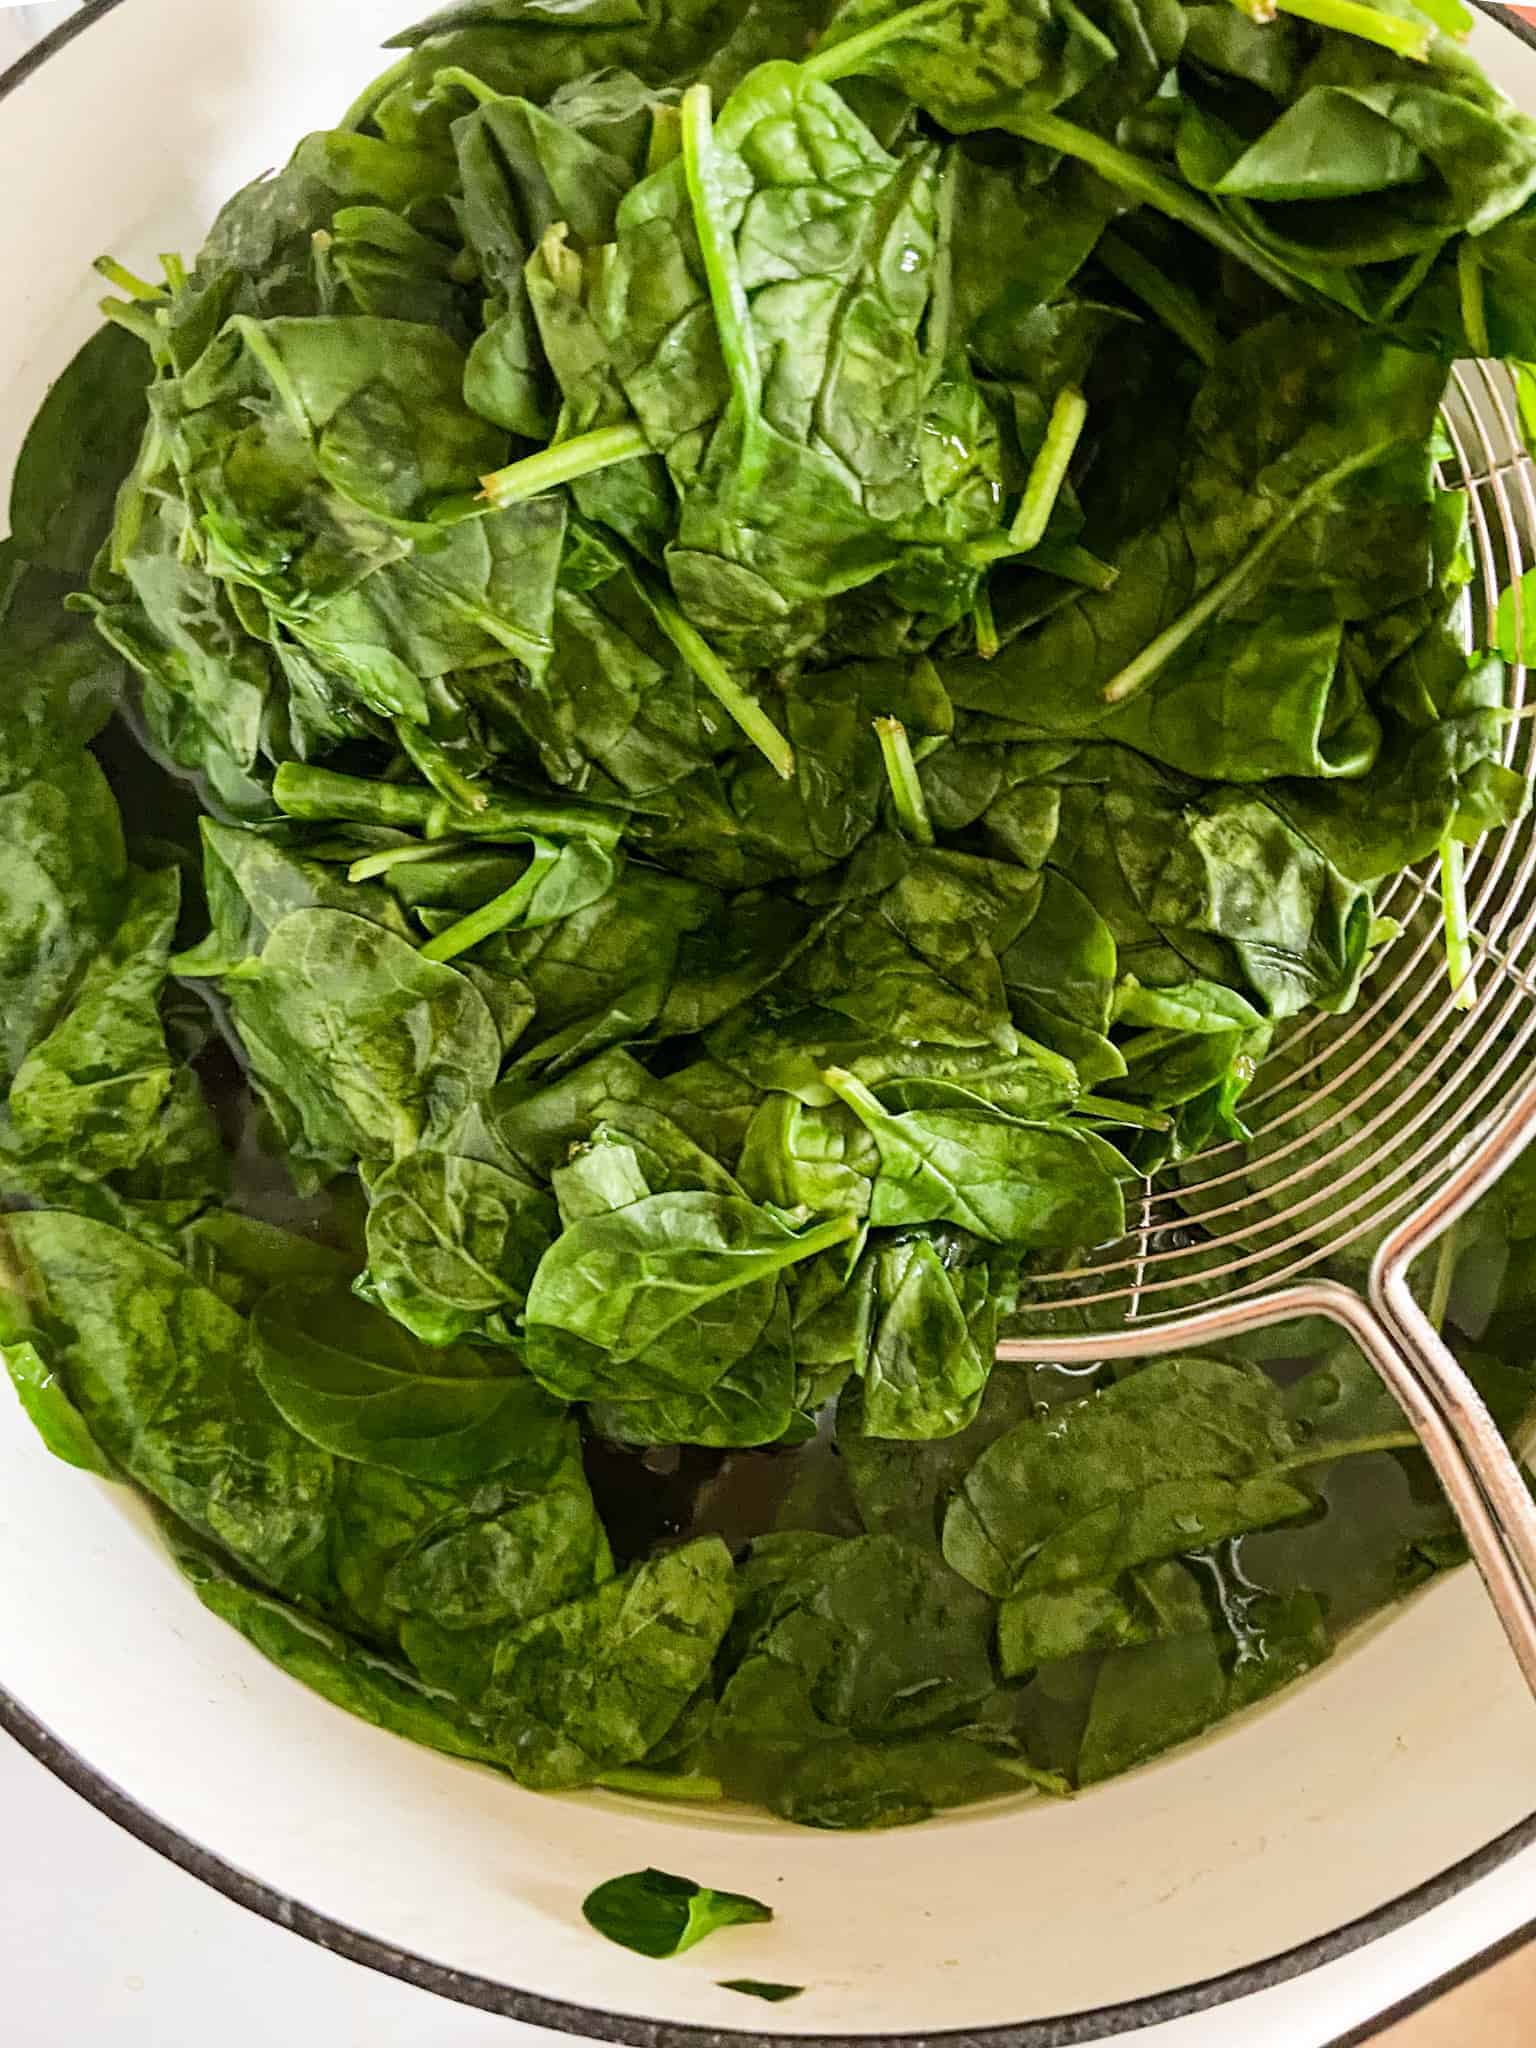 Blanch the spinach. Coldwater bath for spinach. Palak Paneer recipe.